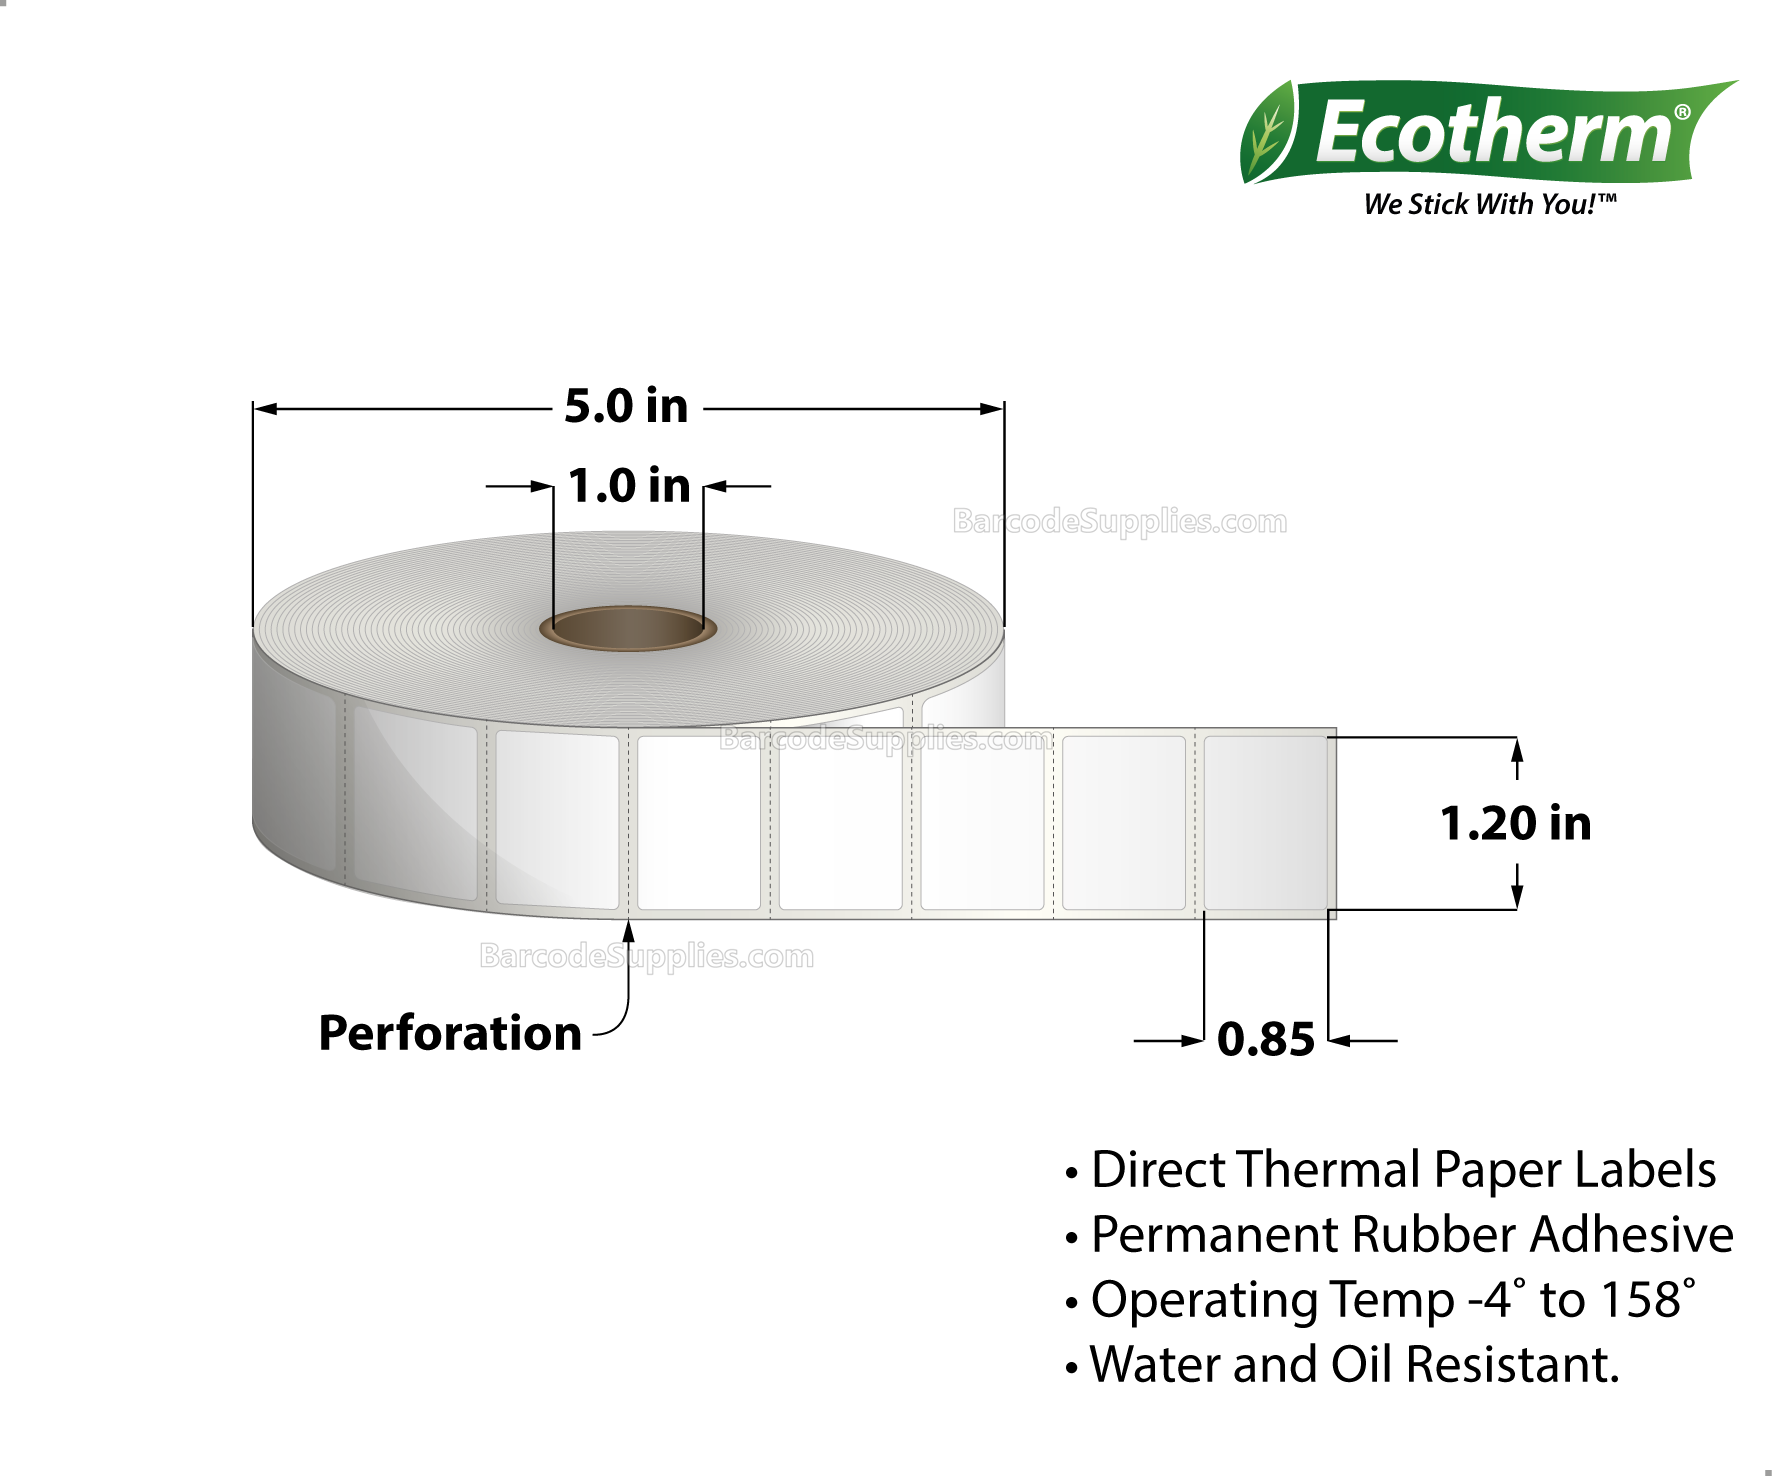 1.2 x 0.85 Direct Thermal White Labels With Rubber Adhesive - Perforated - 2710 Labels Per Roll - Carton Of 6 Rolls - 16260 Labels Total - MPN: ECOTHERM15113-6